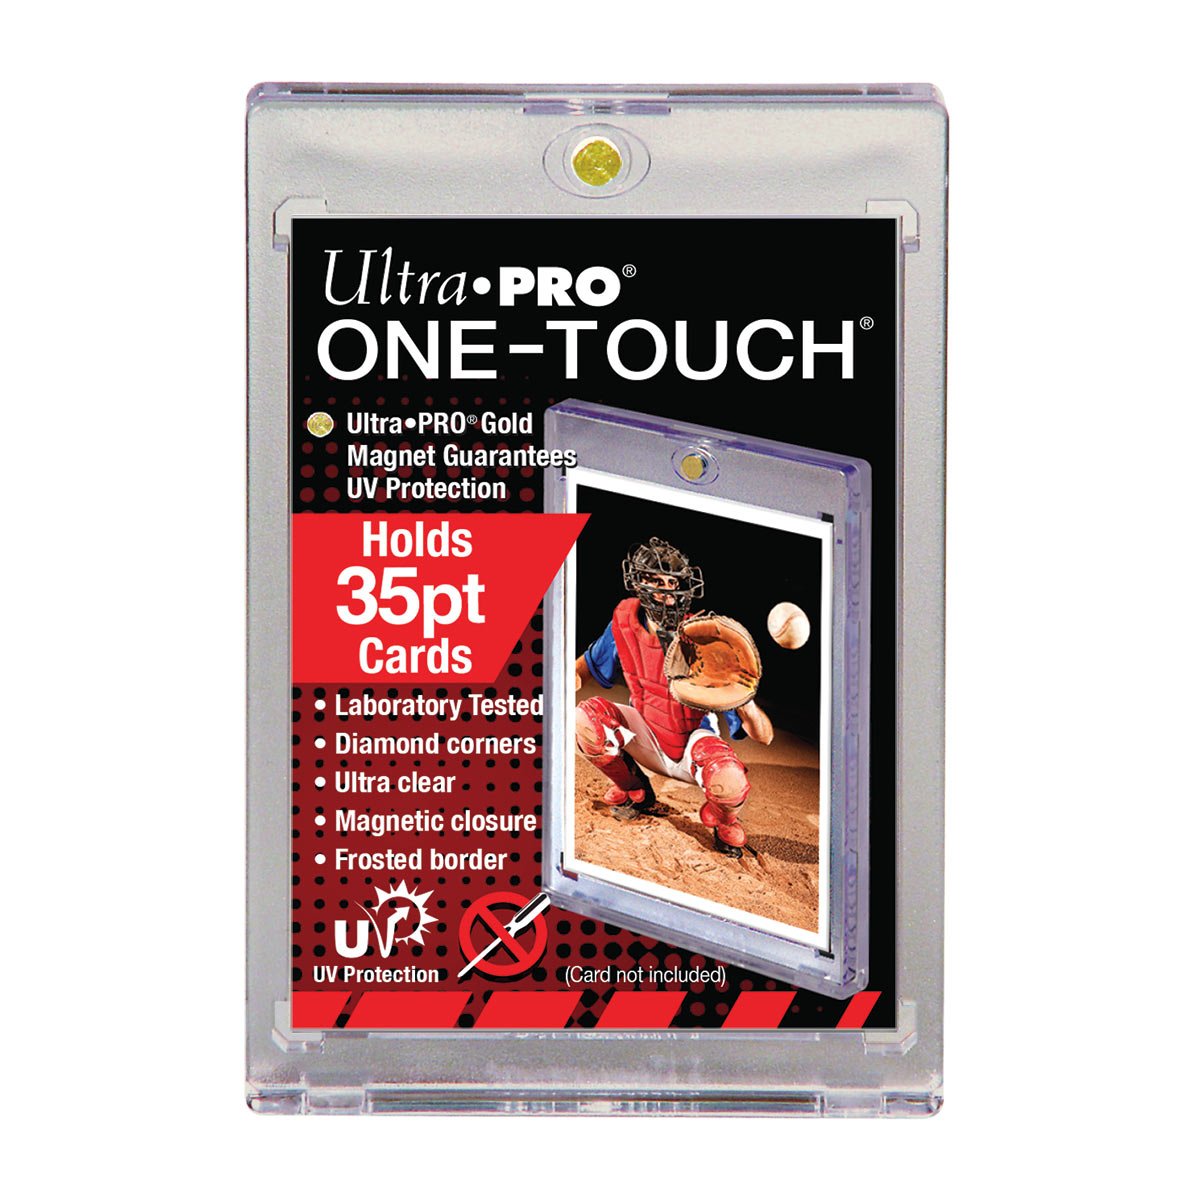 Ultrapro One-Touch 35Pt Card Holder - Magnetic